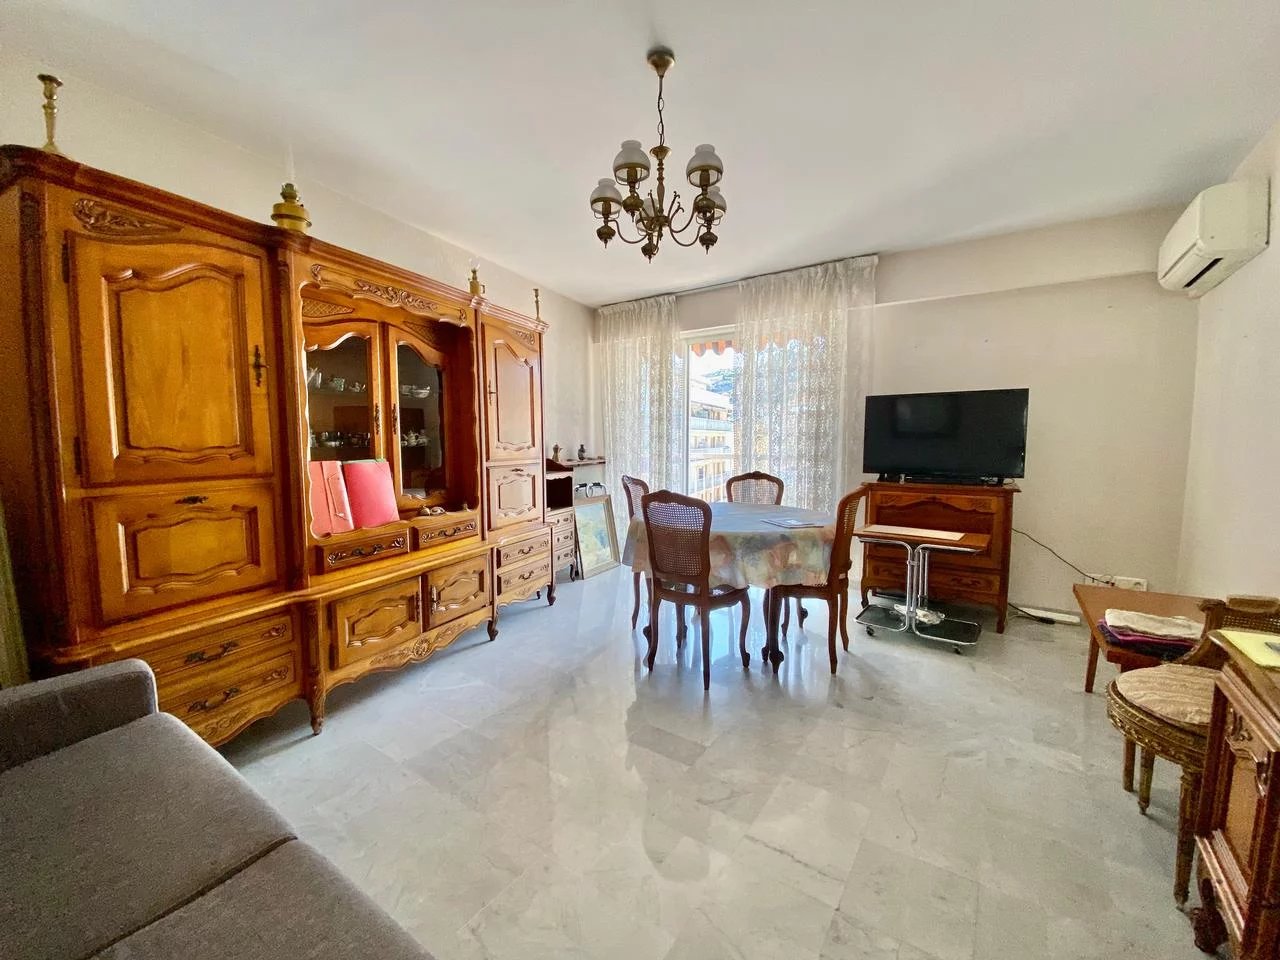 Appartement  3 Rooms 61.4m2  for sale   260 000 €